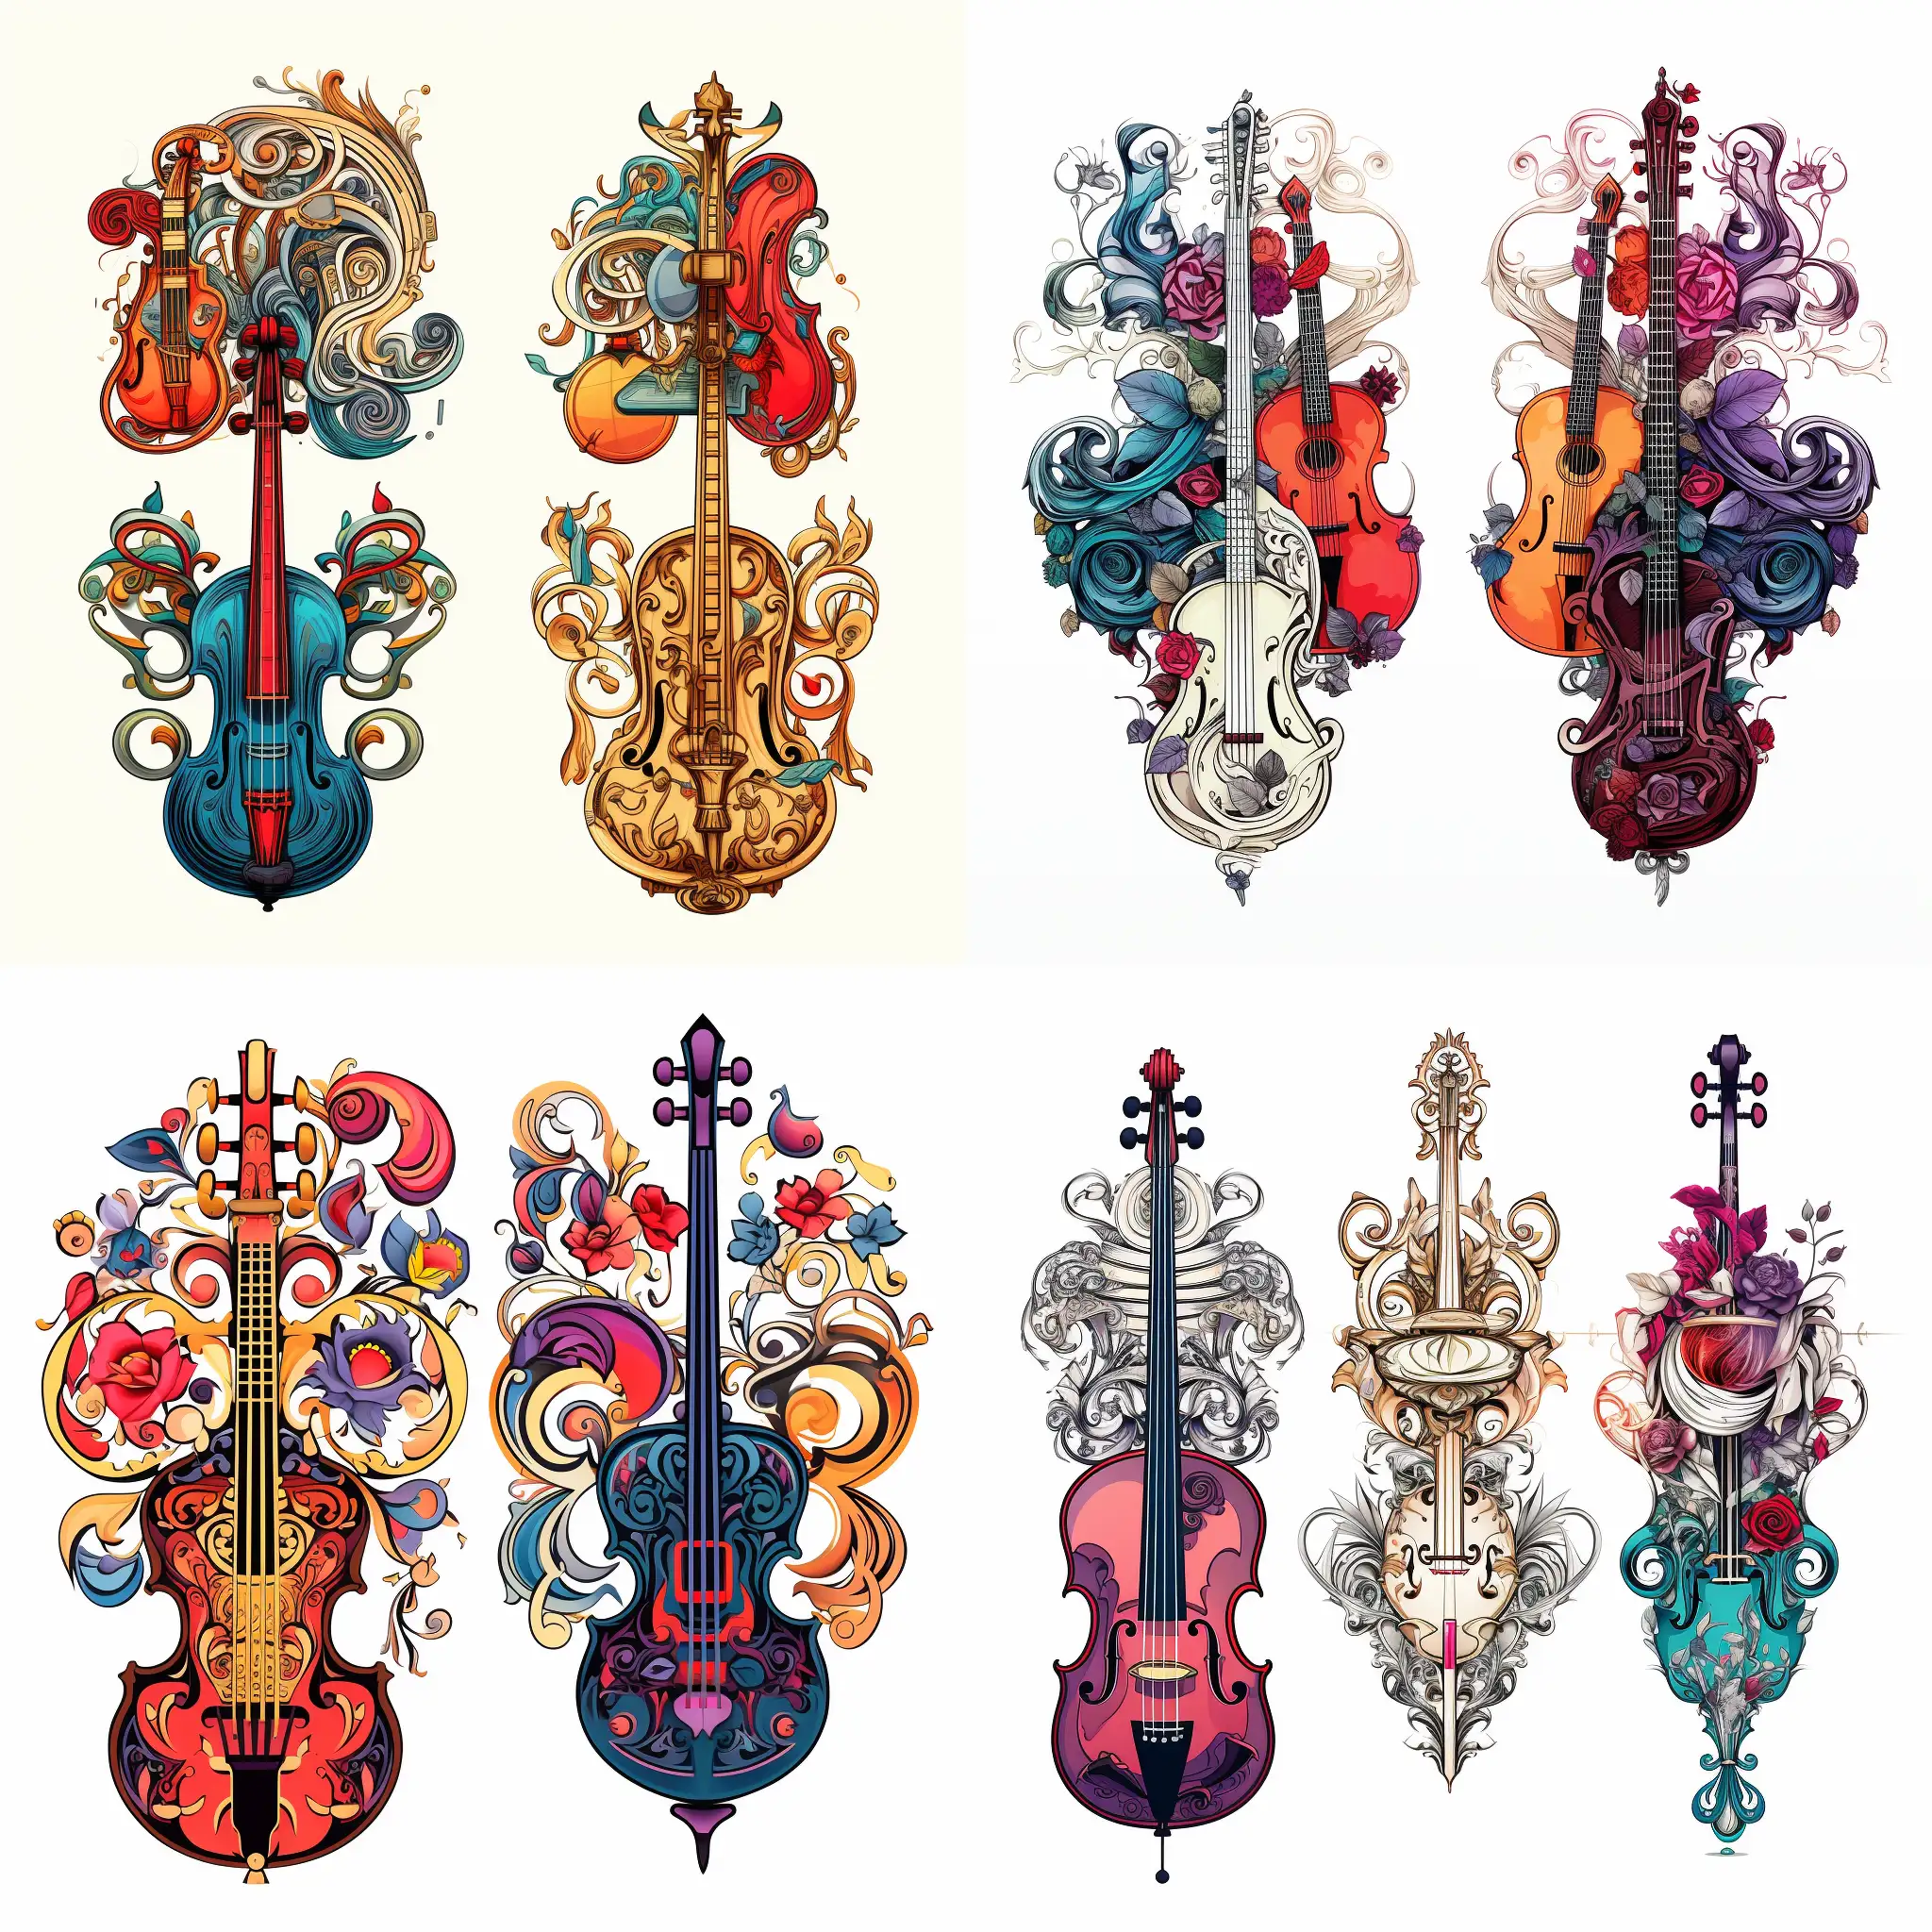 Four options, ornaments, with musical elements, lots of details, complex cpop art style, on a white background